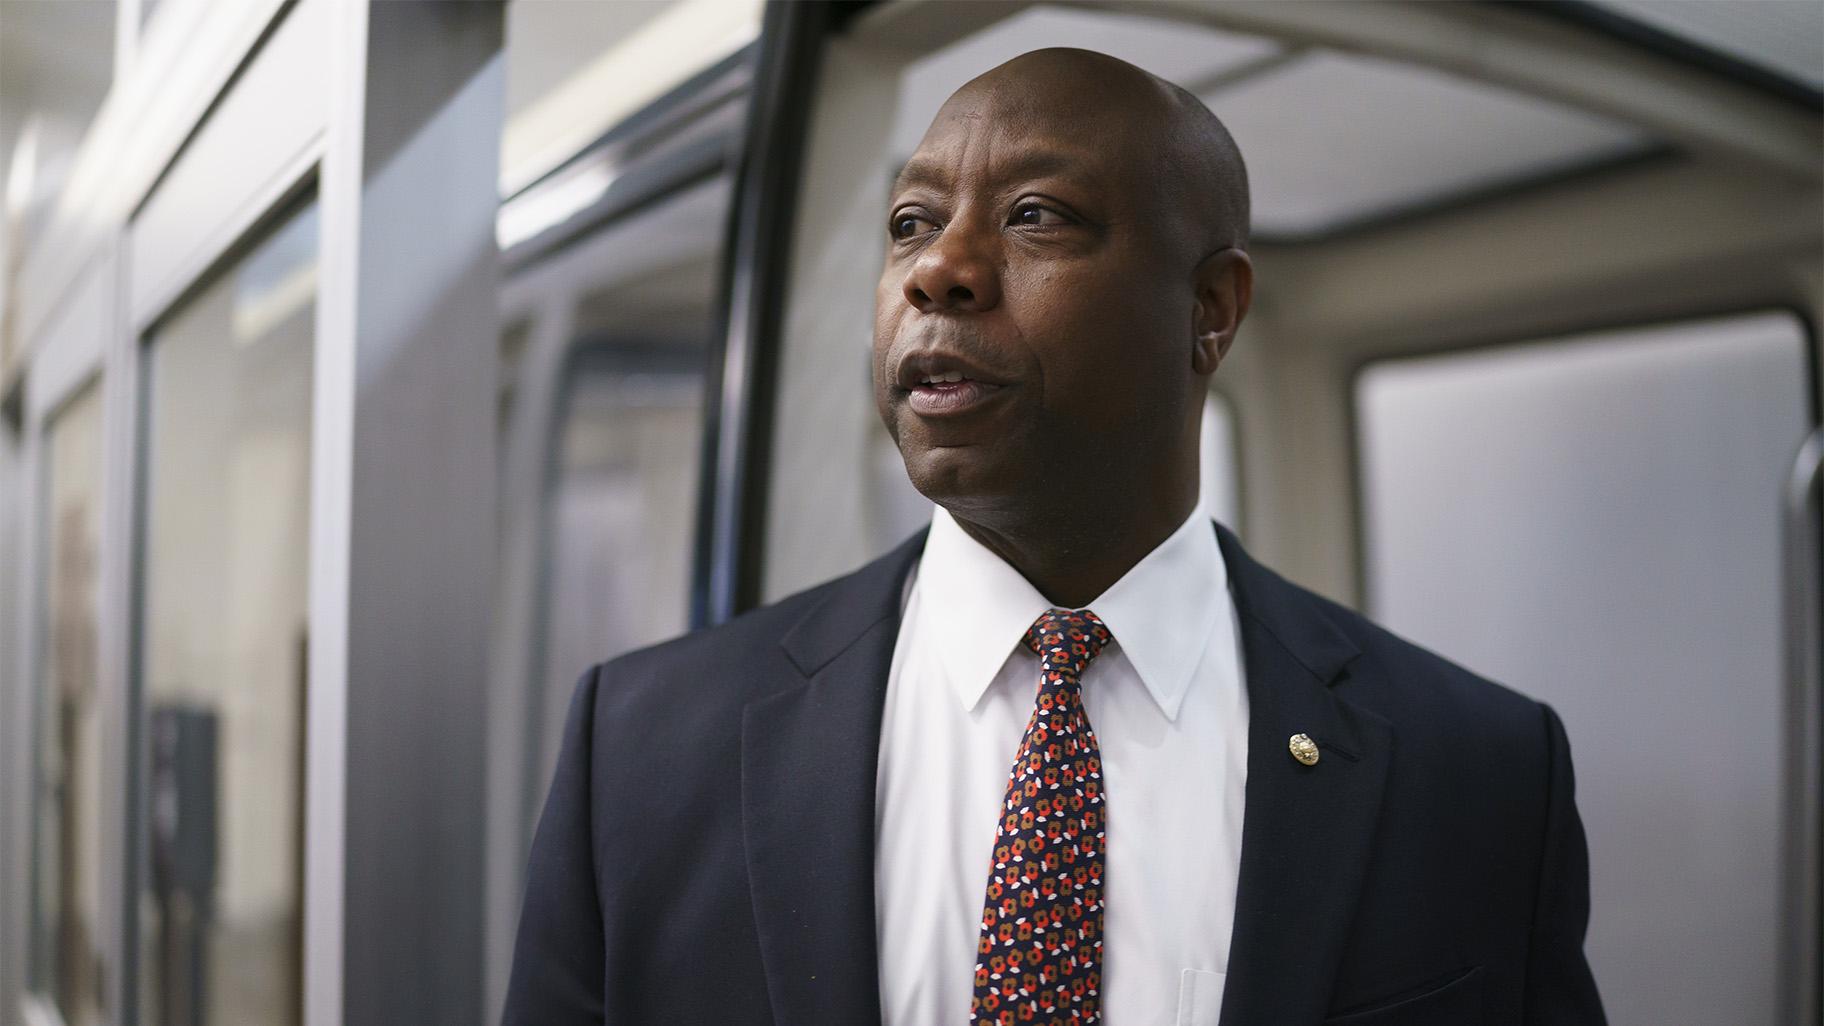 FILE - In this May 27, 2021, file photo Sen. Tim Scott, R-S.C., arrives as senators go to the chamber for votes ahead of the approaching Memorial Day recess, at the Capitol in Washington. (AP Photo / J. Scott Applewhite, File)